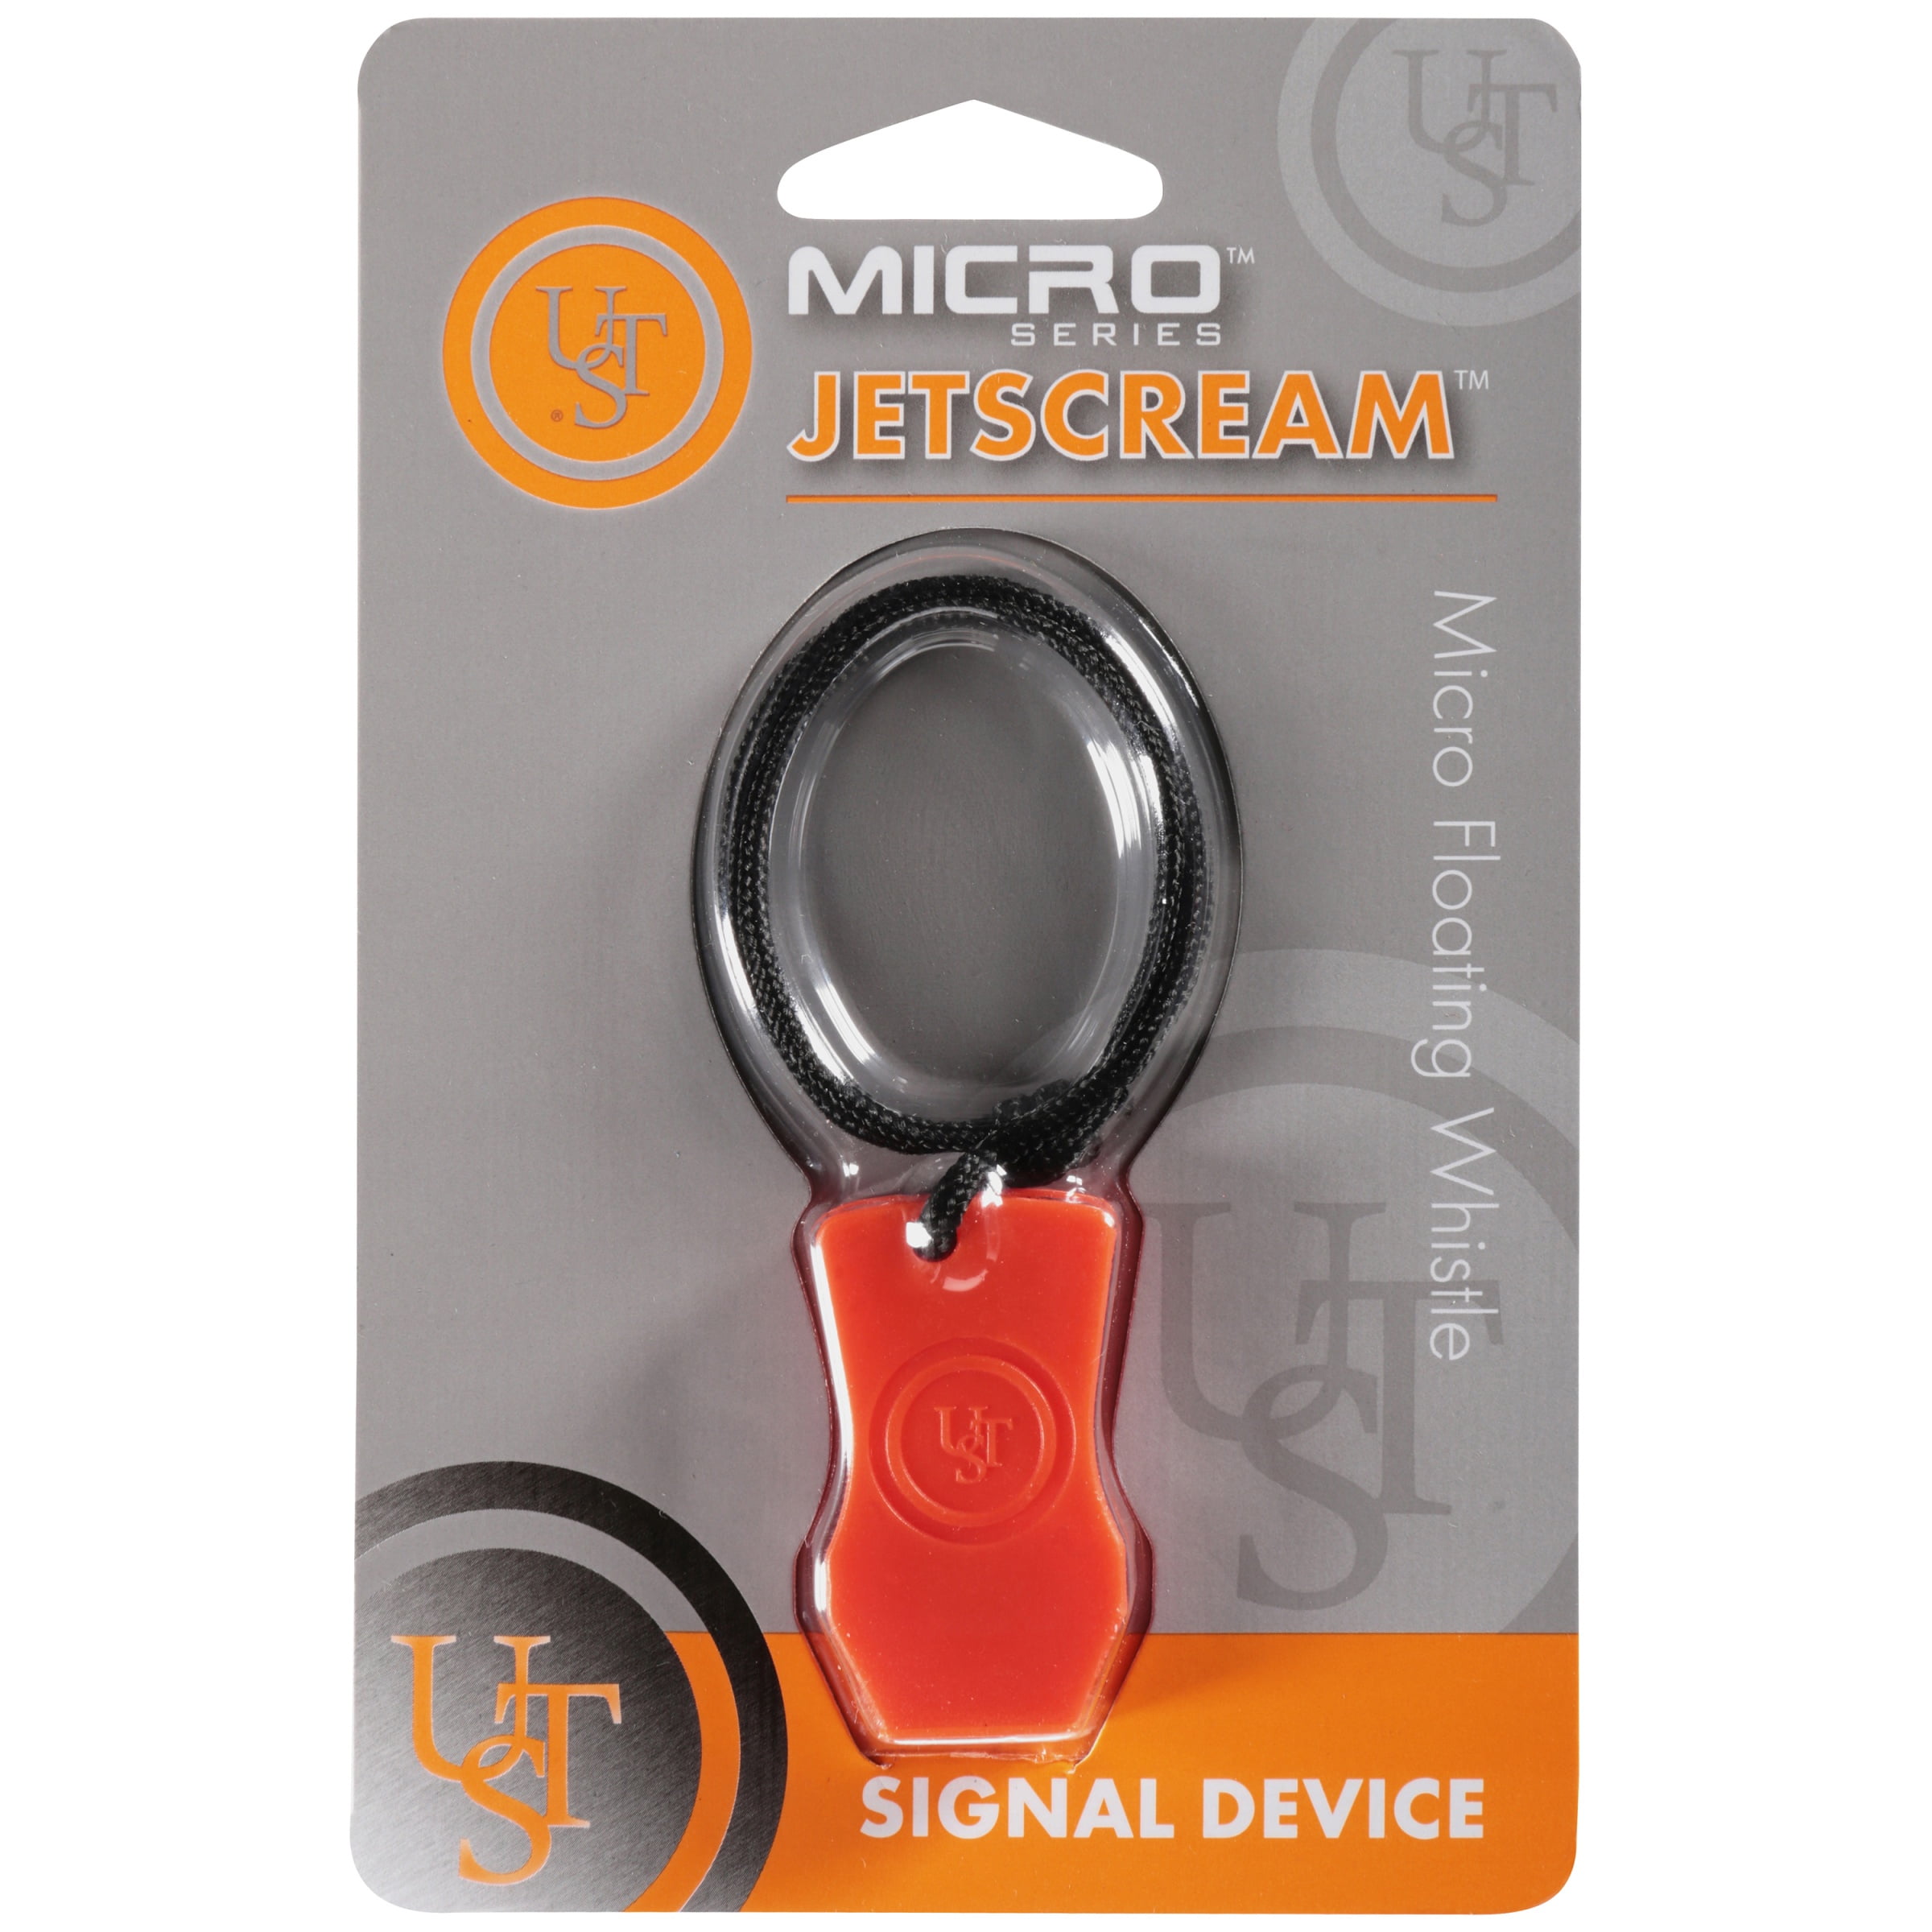 Compact UST JetScream Floating Whistle with Powerful 122 dB Signal Pea-Less Lightweight Design and Lanyard for Use in Emergency Situations and Outdoor Survival 